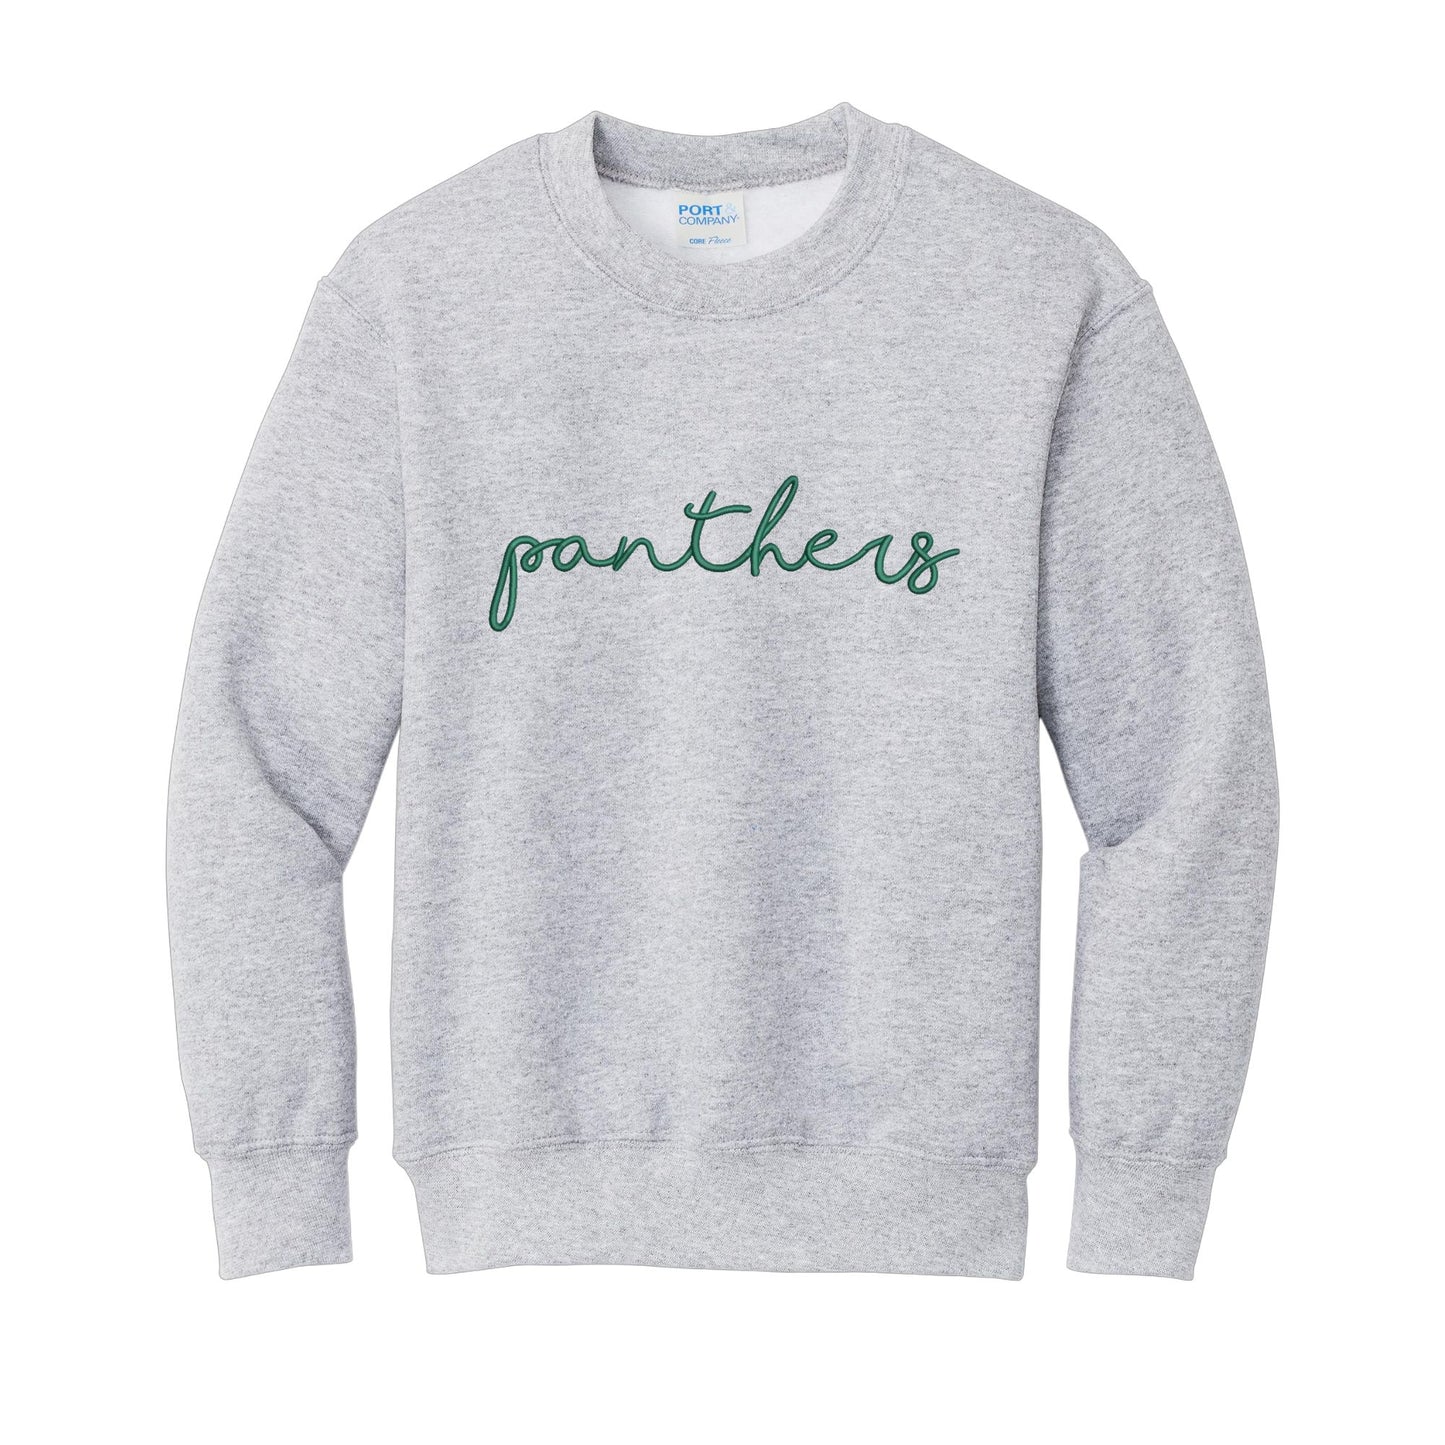 athletic heather crewneck sweatshirt with panthers embroidered across the chest in an ivy green thread